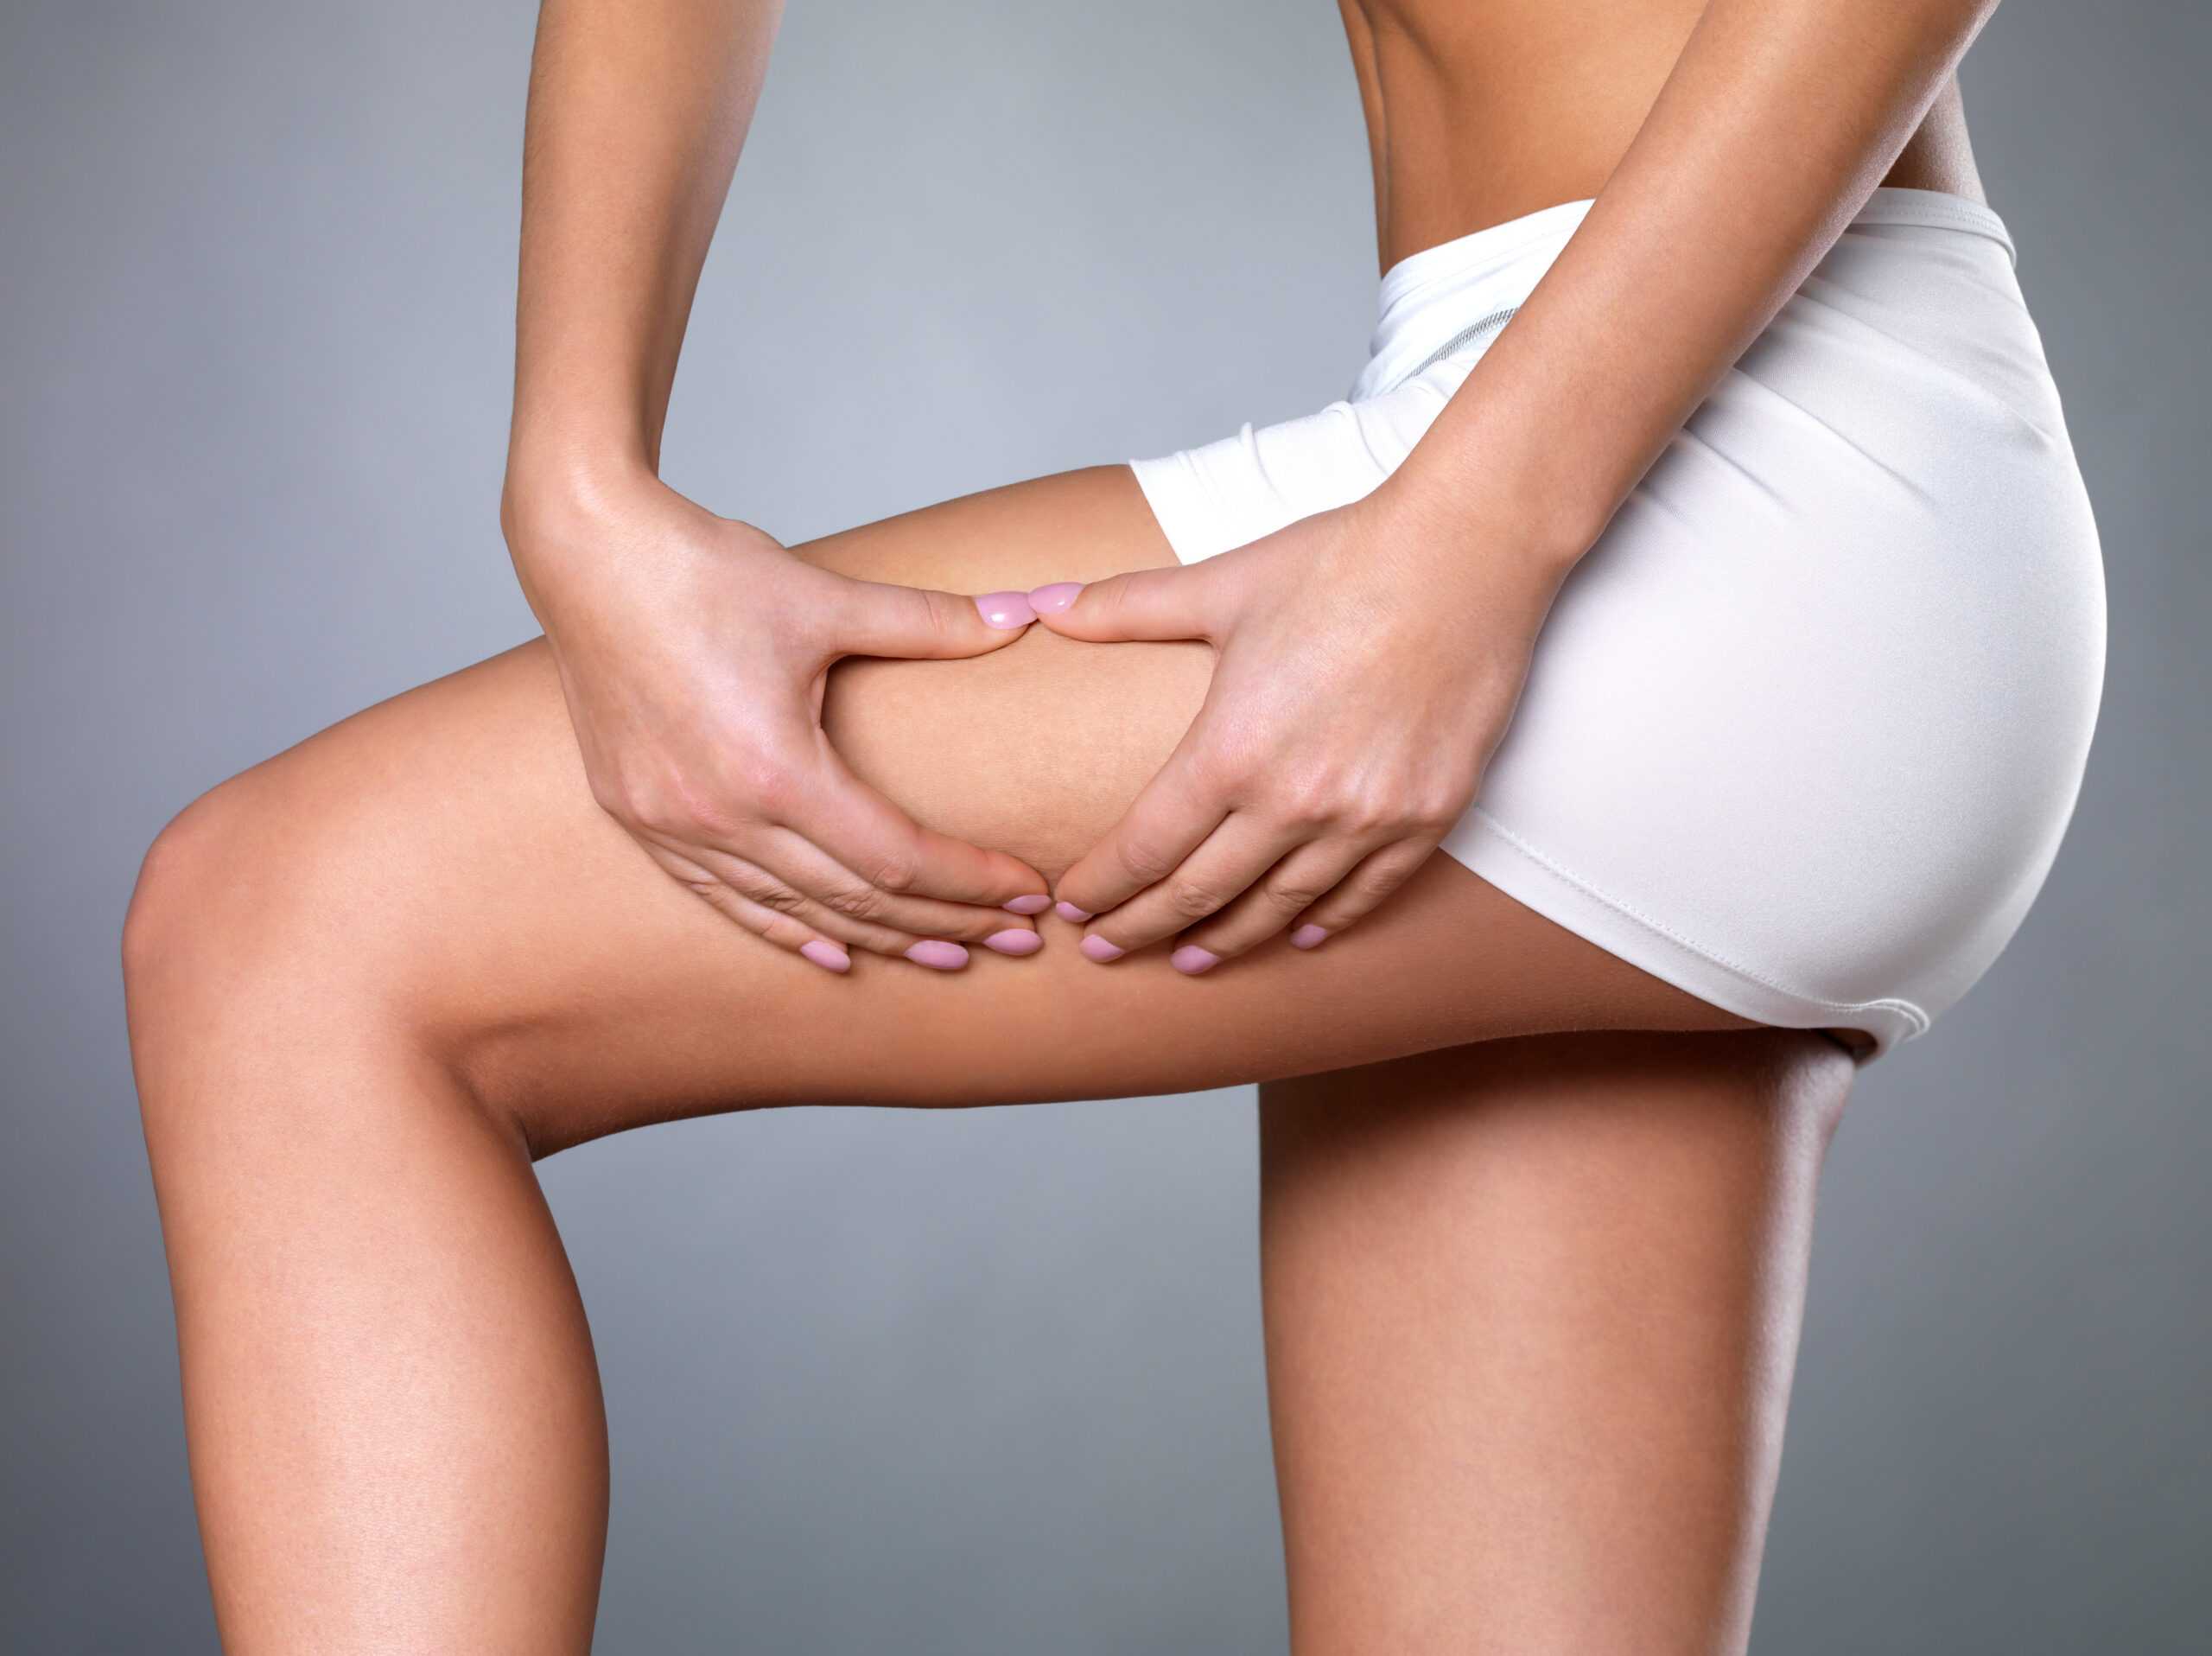 How to reduce thigh fat and strengthen my legs? – Credihealth Blog